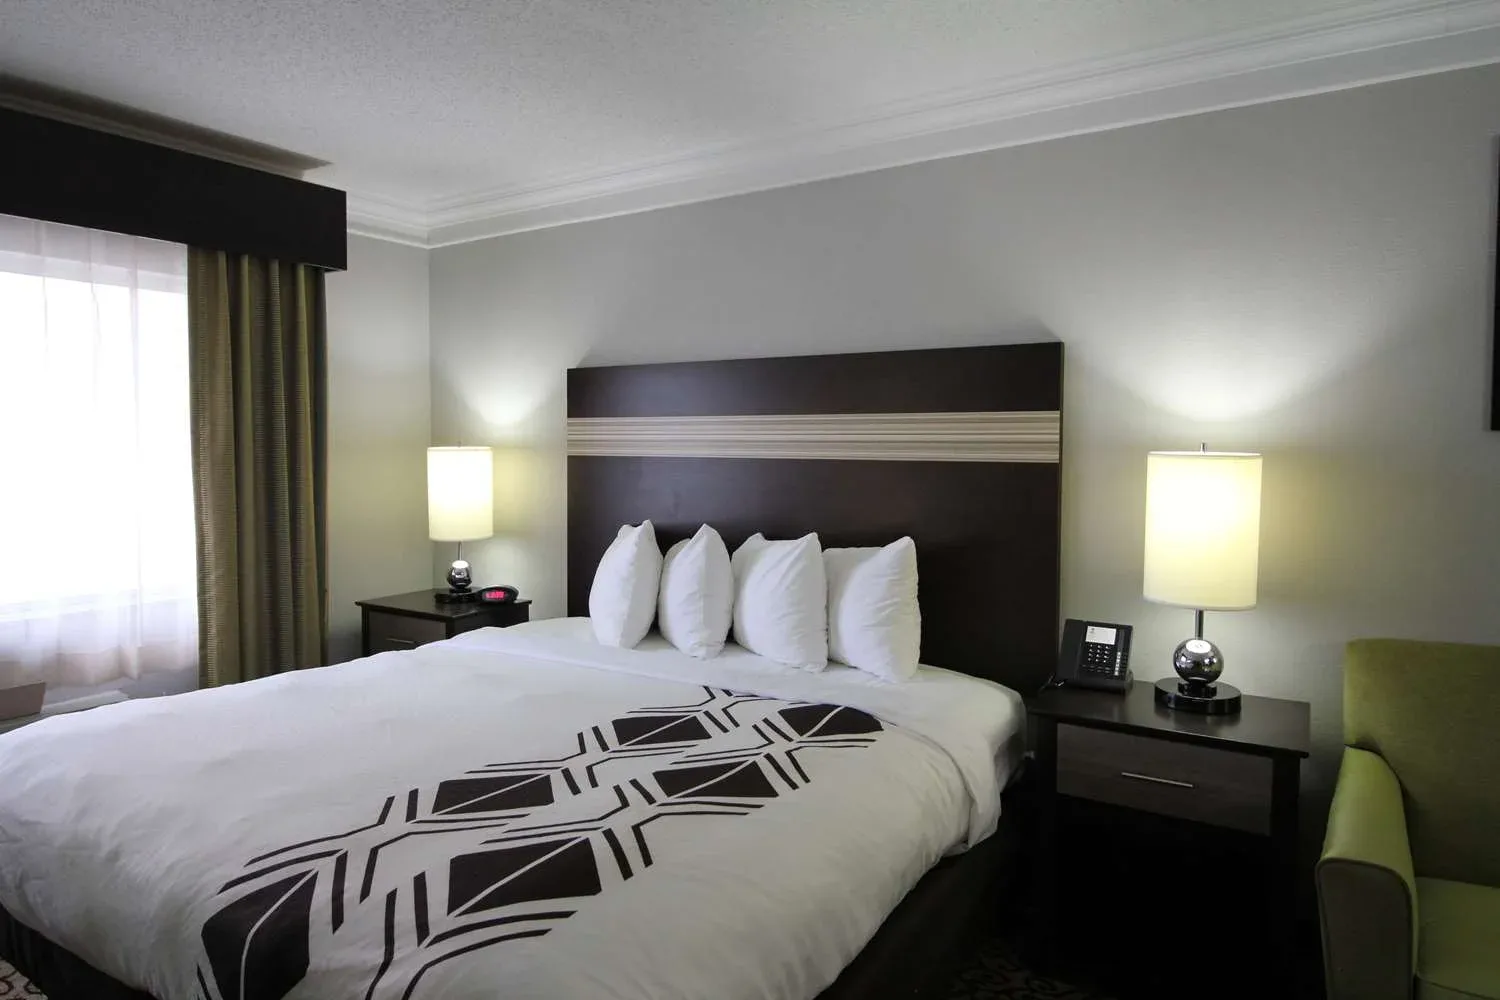 Hotel Room Reservations in Slidell